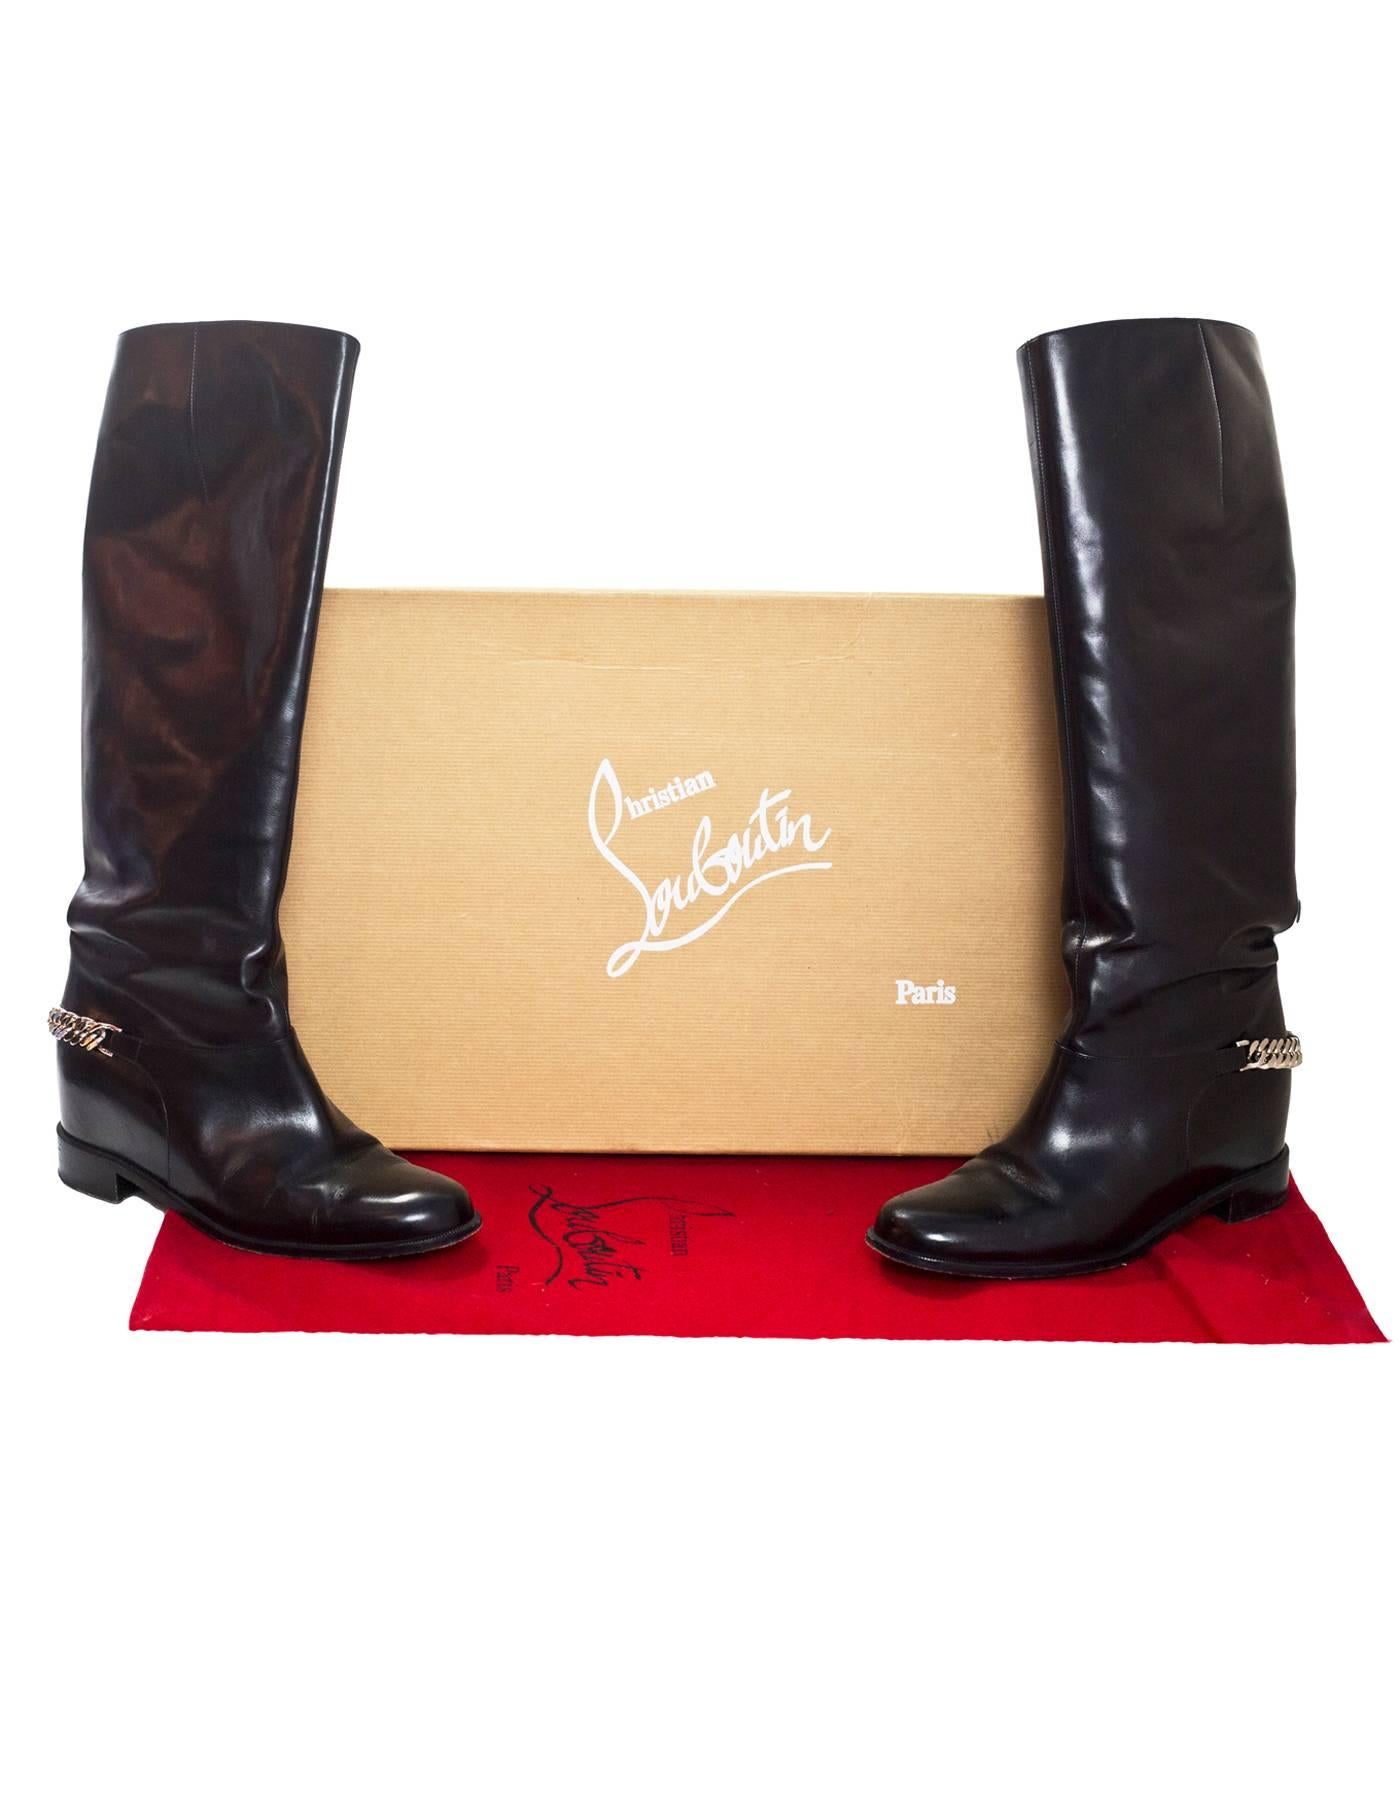 Women's Christian Louboutin Black Cate Riding Boots Sz 38.5 with Box and DB